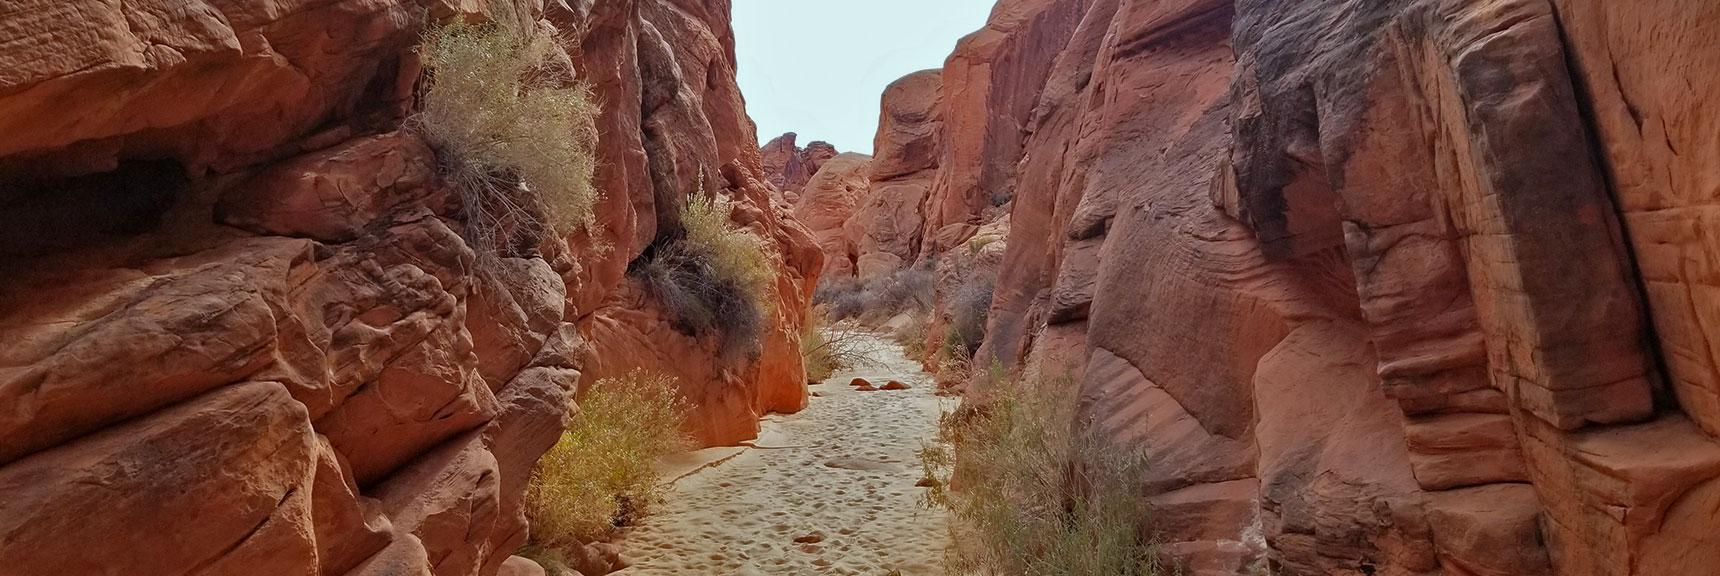 Evidence of Increasing Foot Traffic Begins to Appear in Fire Canyon in Valley of Fire State Park, Nevada